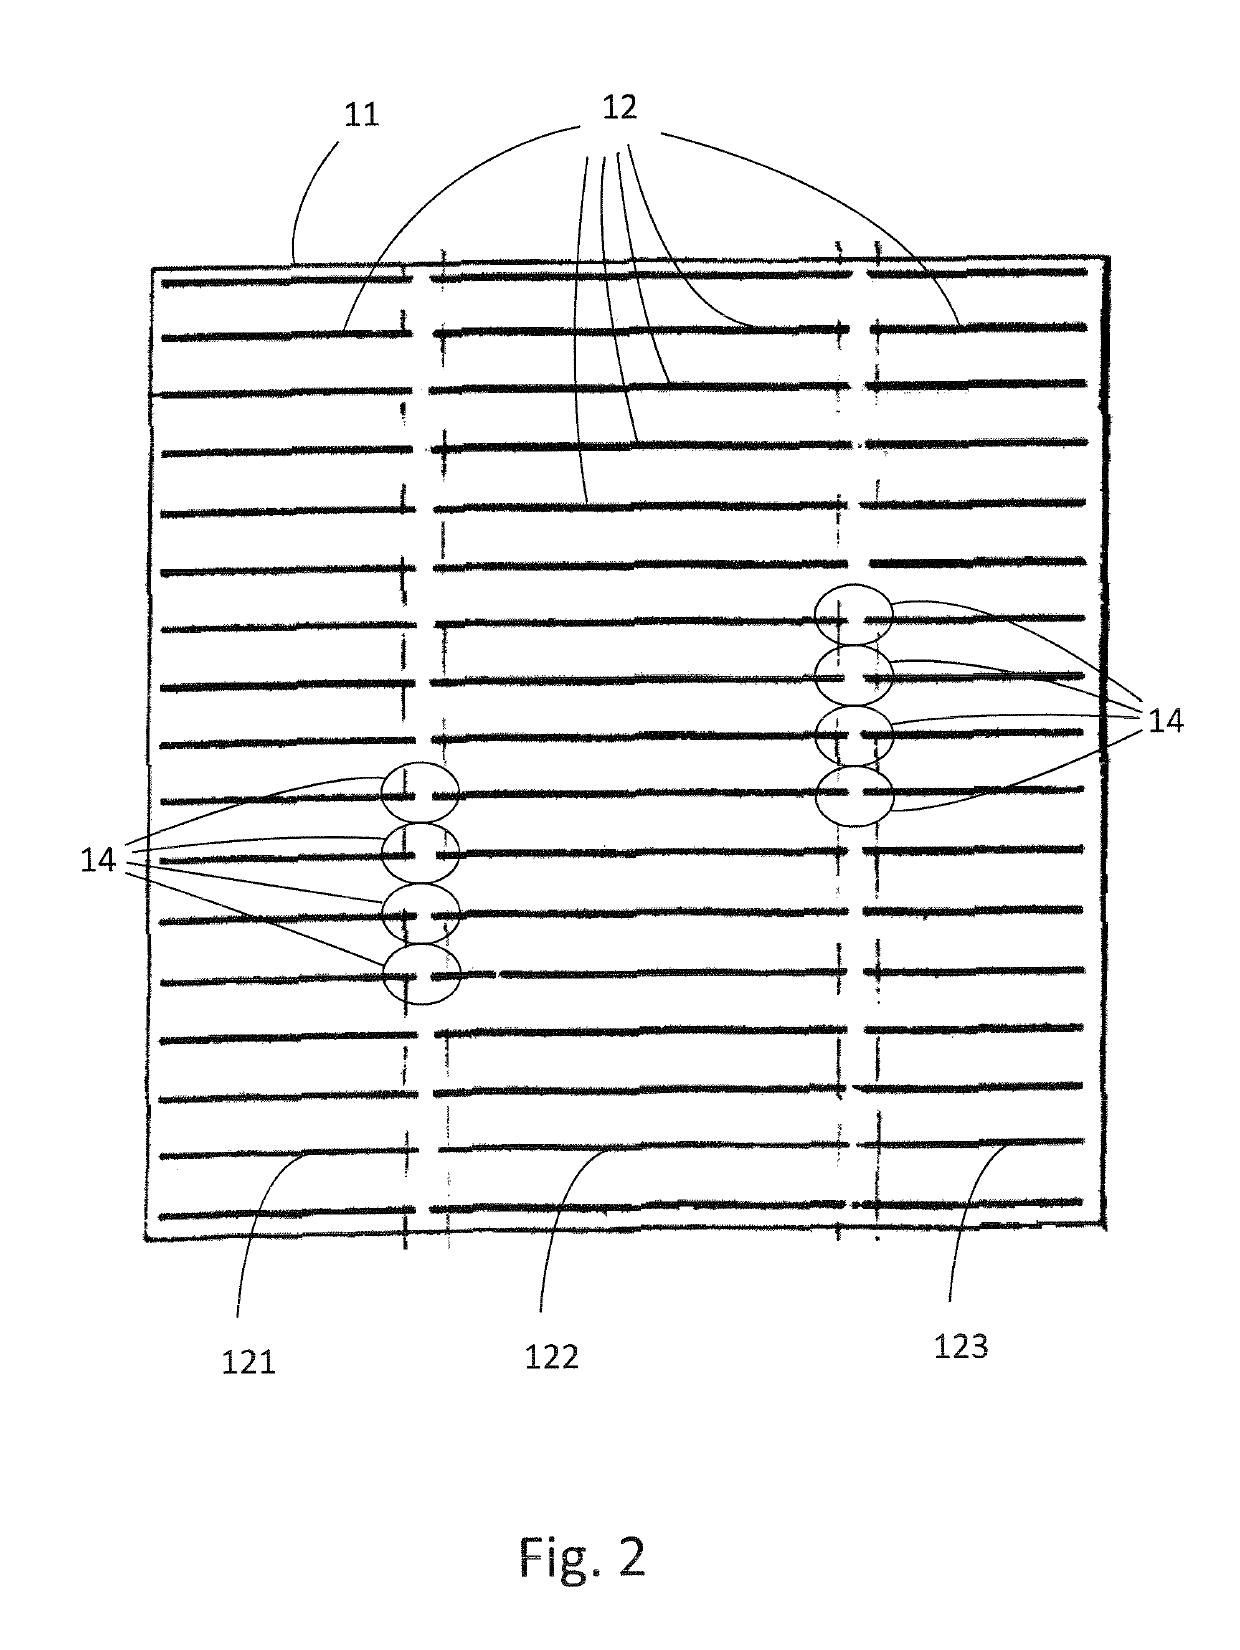 Photovoltaic cell having discontinuous conductors